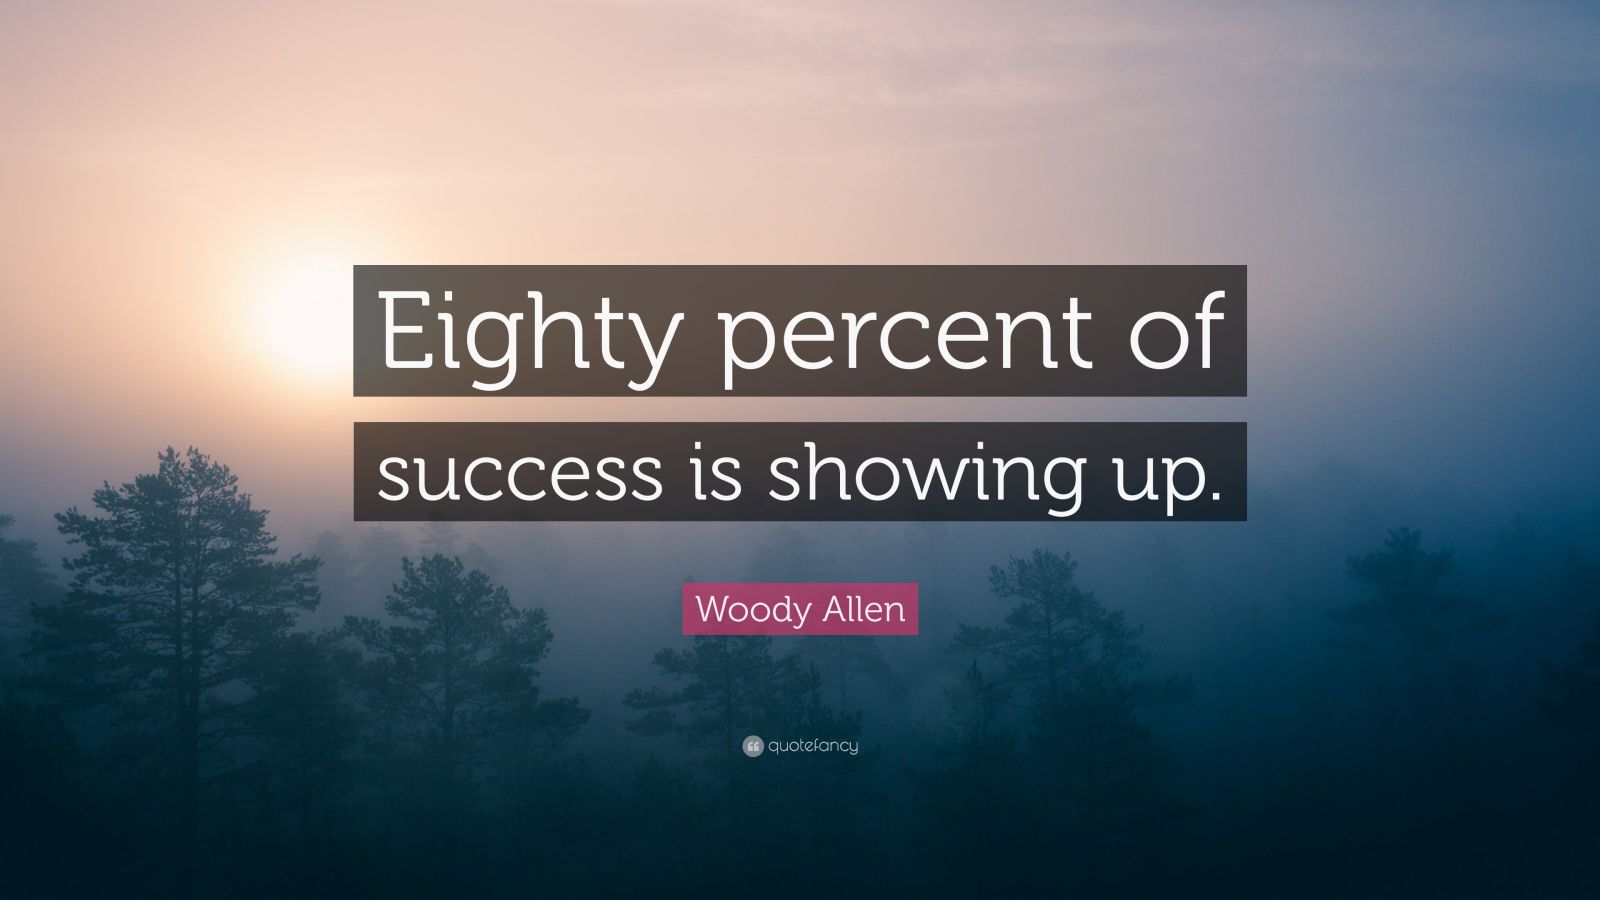 Woody Allen Quote “eighty Percent Of Success Is Showing Up” 23 Wallpapers Quotefancy 1154